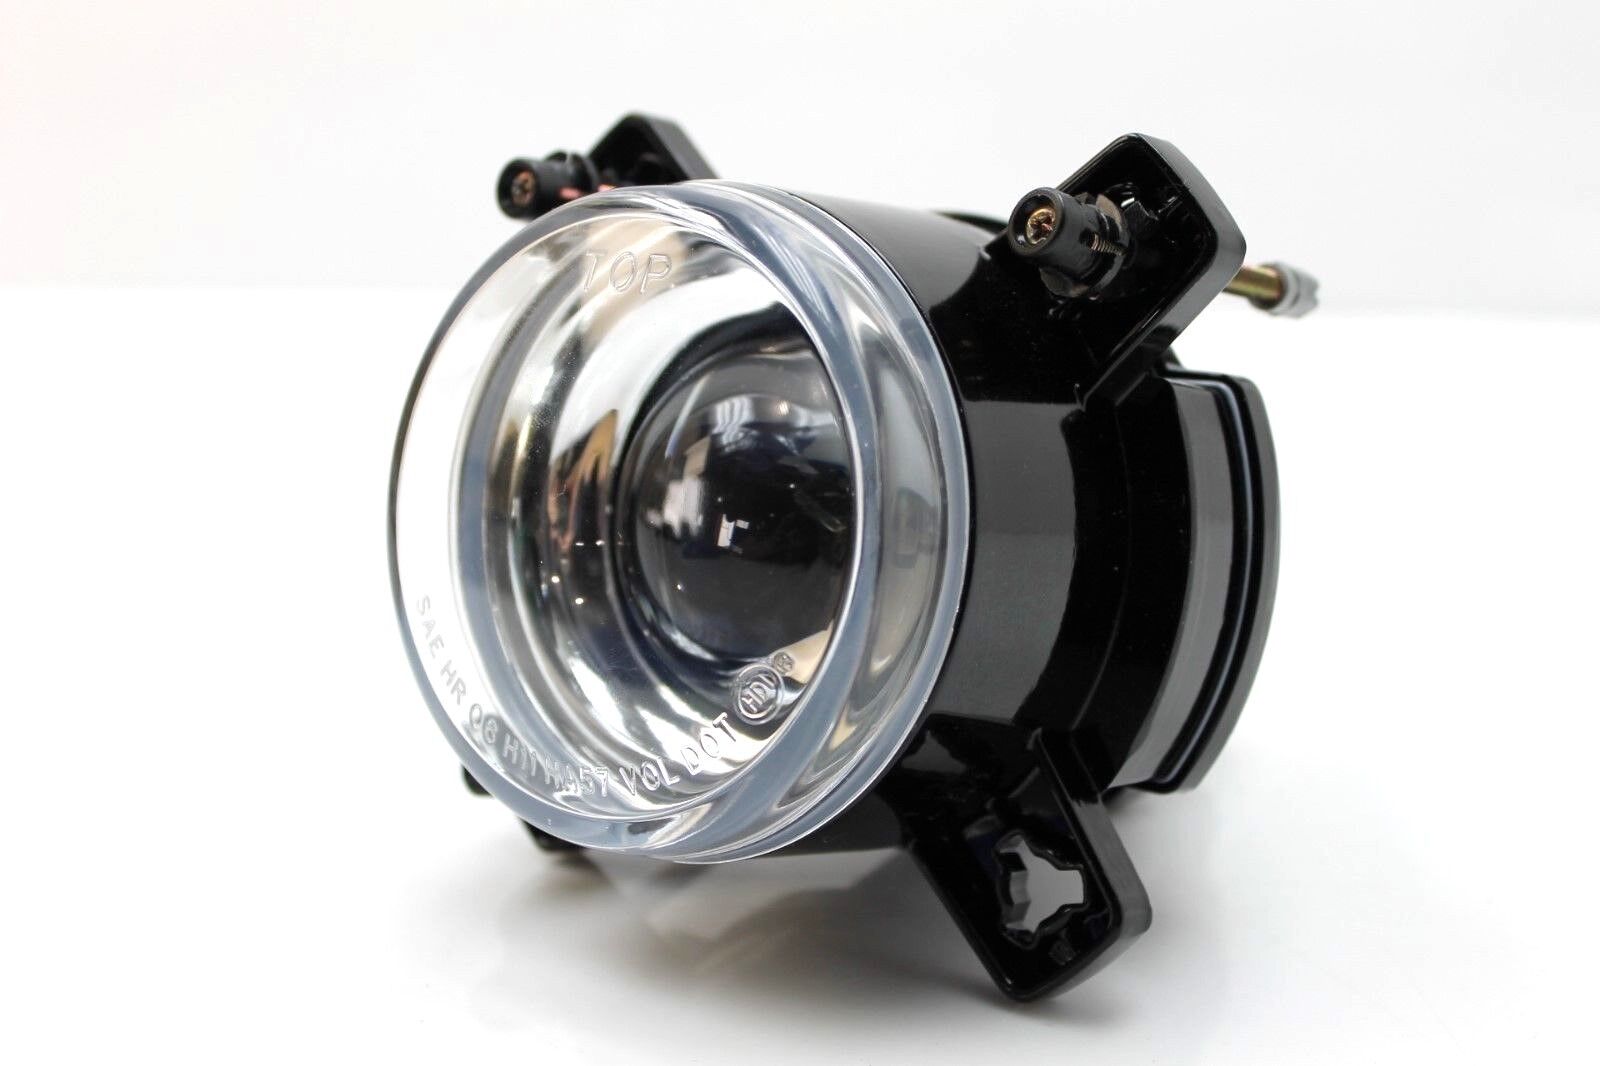 NEW HEADLIGHT 90MM - PHILLIPS H11 BULB 12V - 55W - PROJECTOR LOW BEAM COACH BUS 